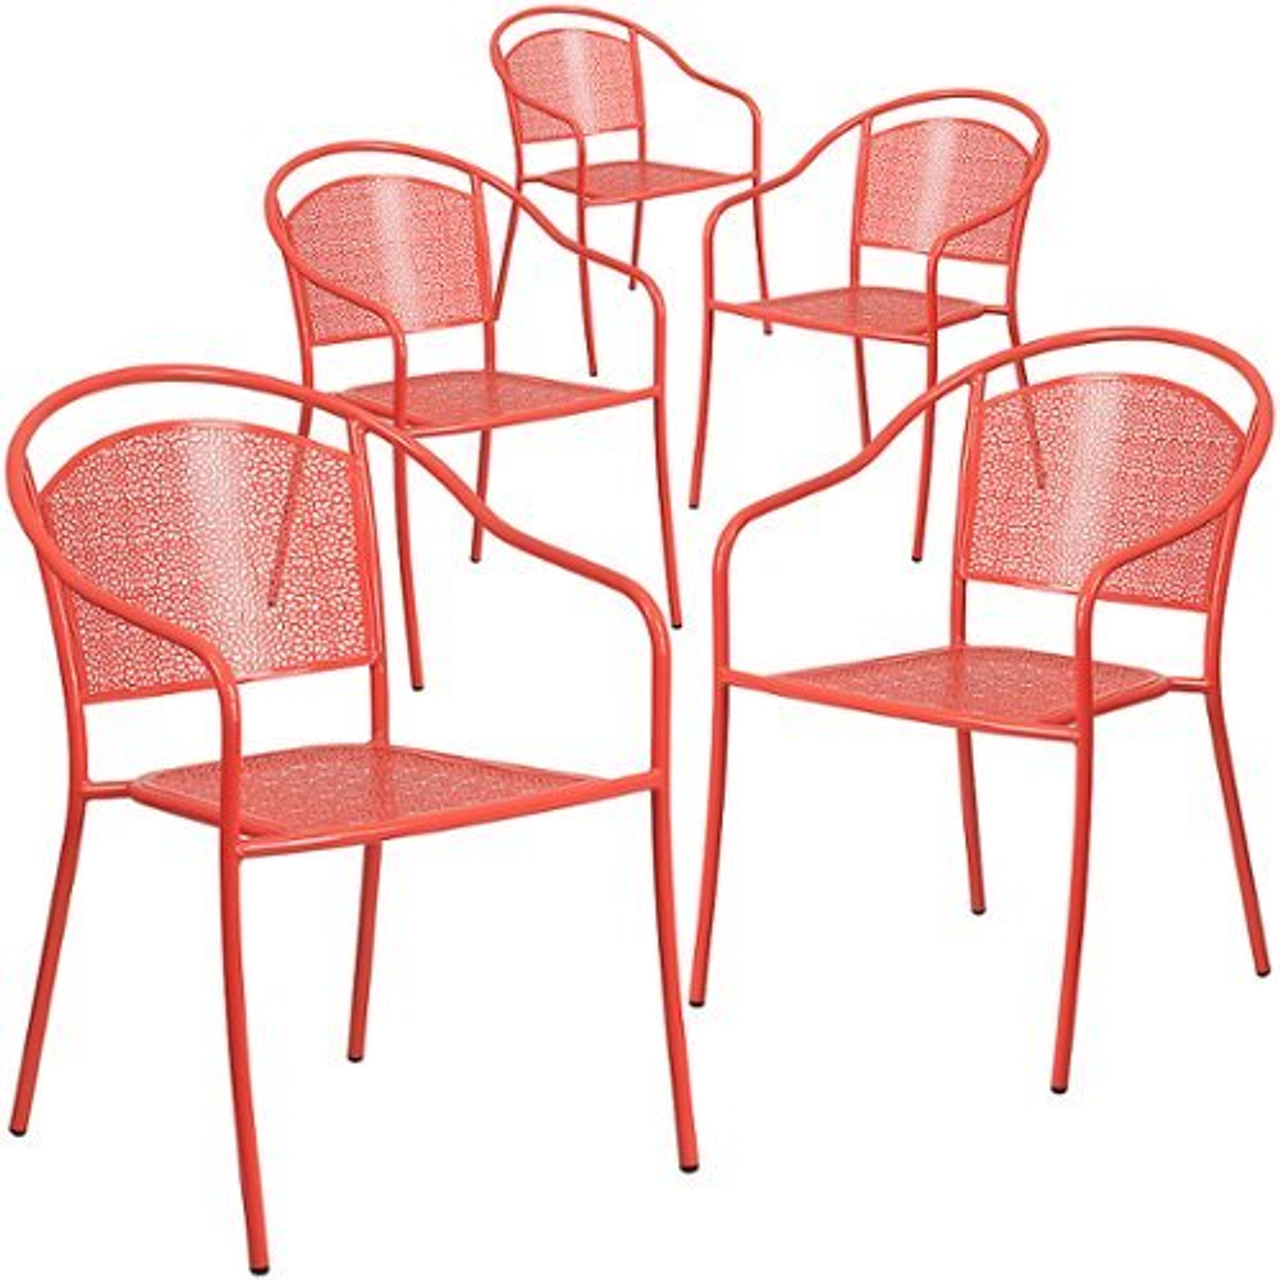 Flash Furniture - Oia Patio Chair (set of 5) - Coral